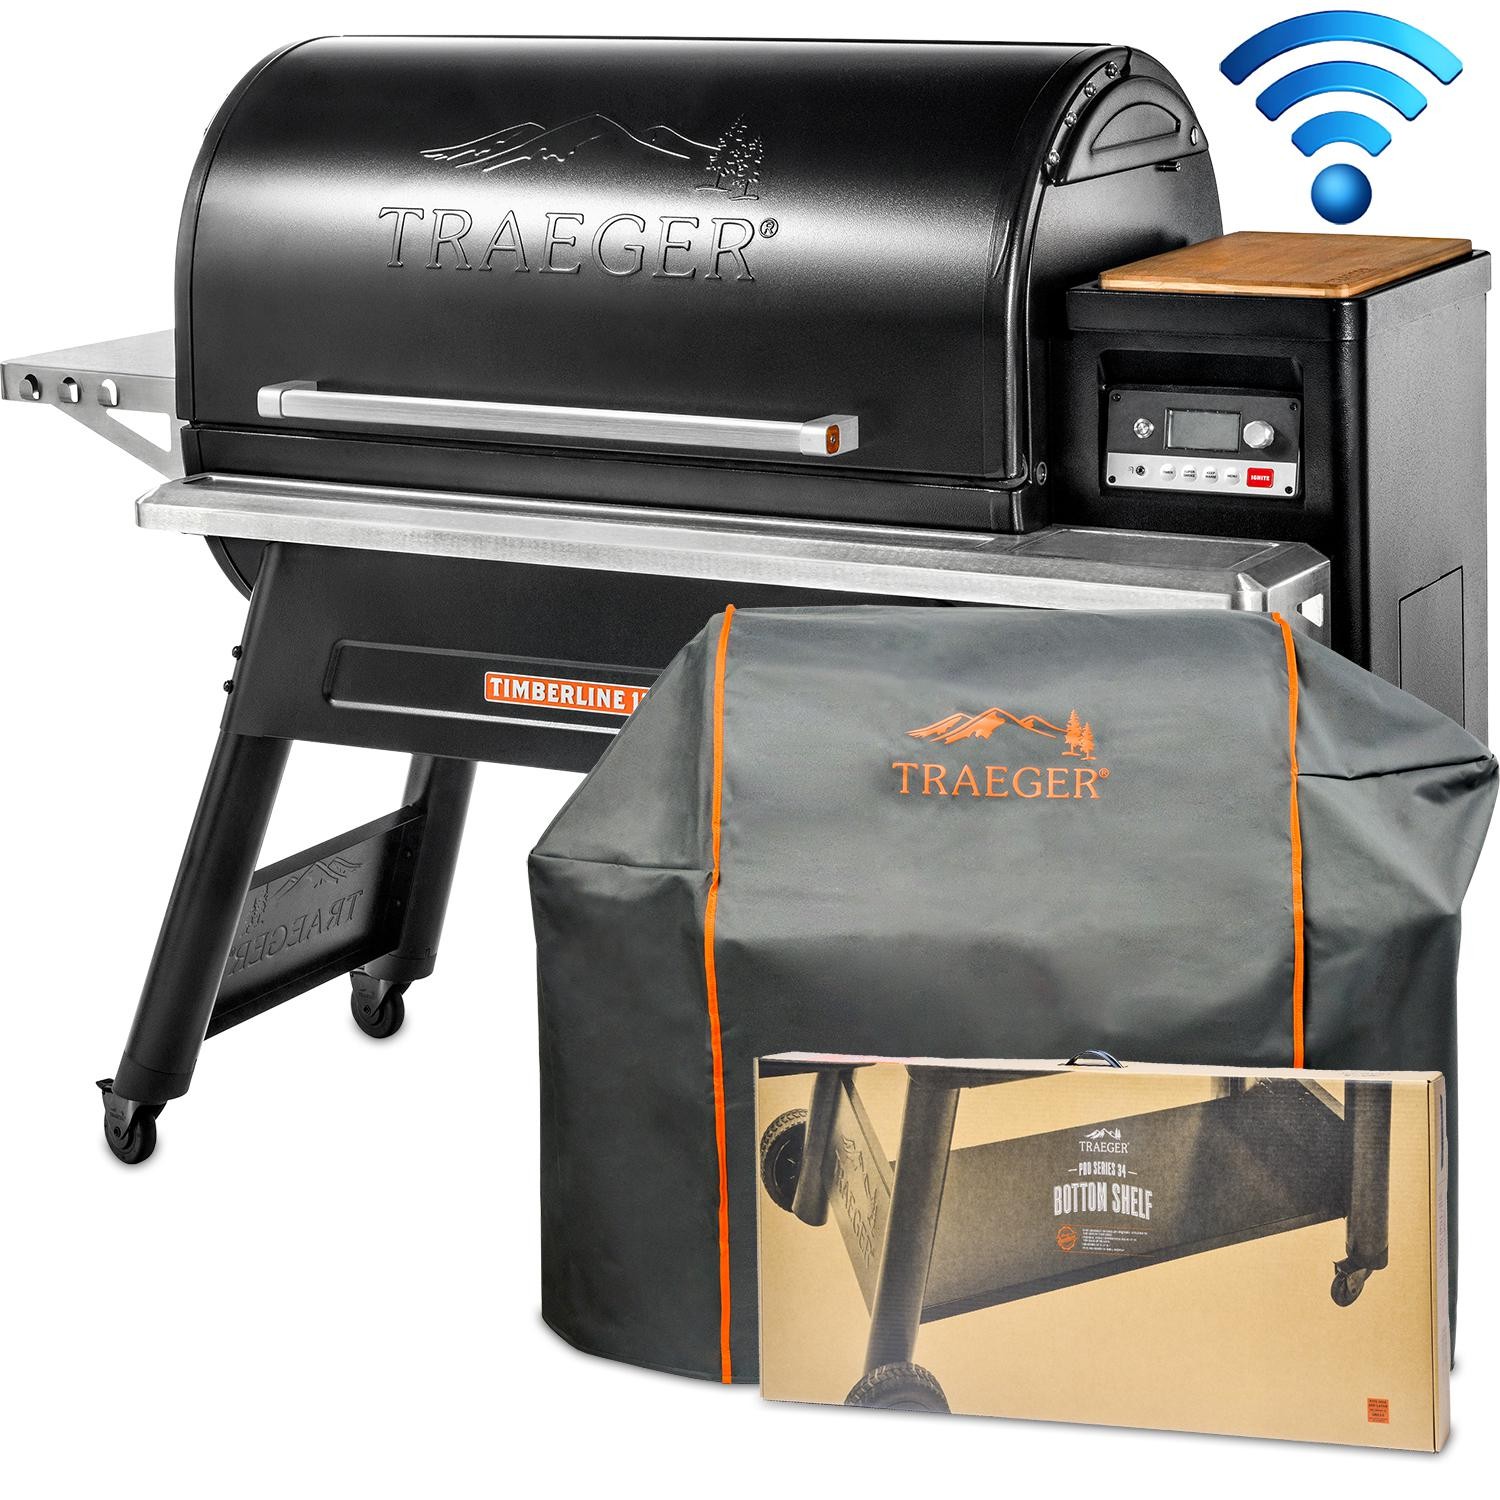 Traeger Timberline 1300 Wi Fi Controlled Wood Pellet Grill W Bottom Shelf & Grill Cover TFB01WLB BBQGuys